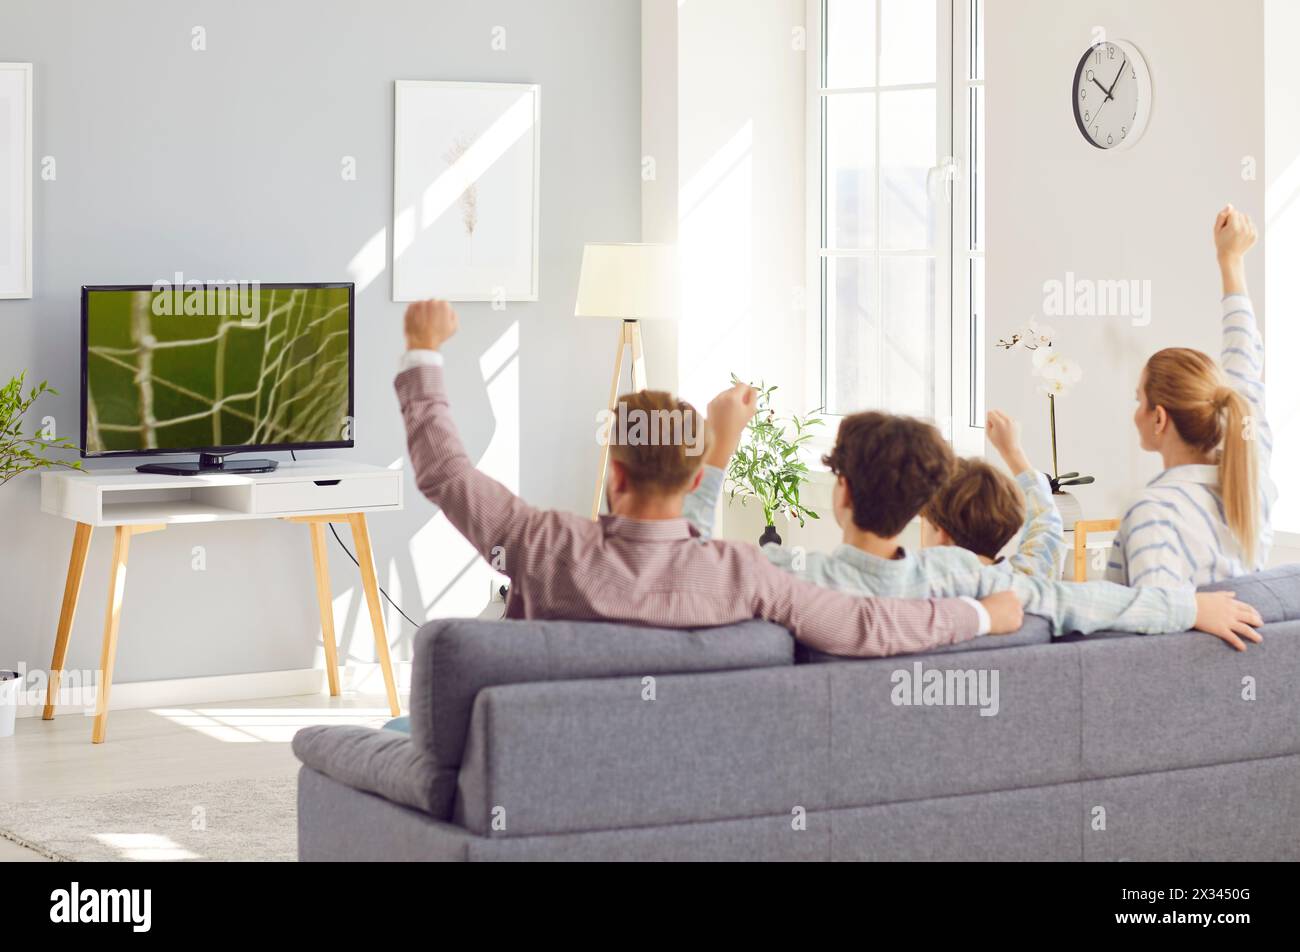 Family Watching Soccer Match on TV and Celebrating Team Goal Stock Photo